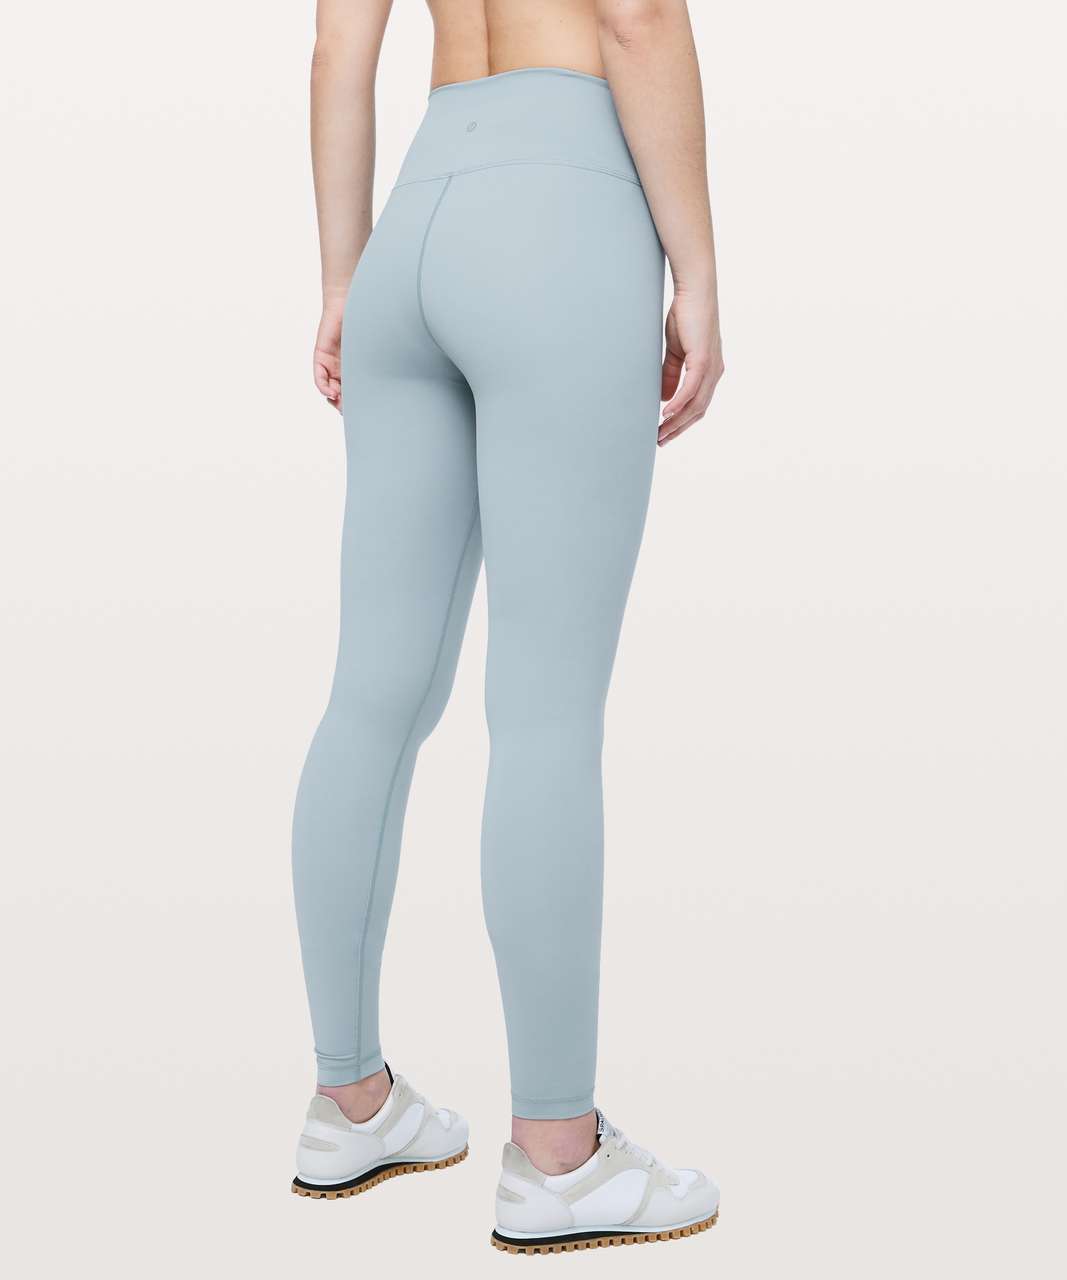 Lululemon Wunder Under High-Rise Tight *Full-On Luxtreme Tall 31" - Blue Cast